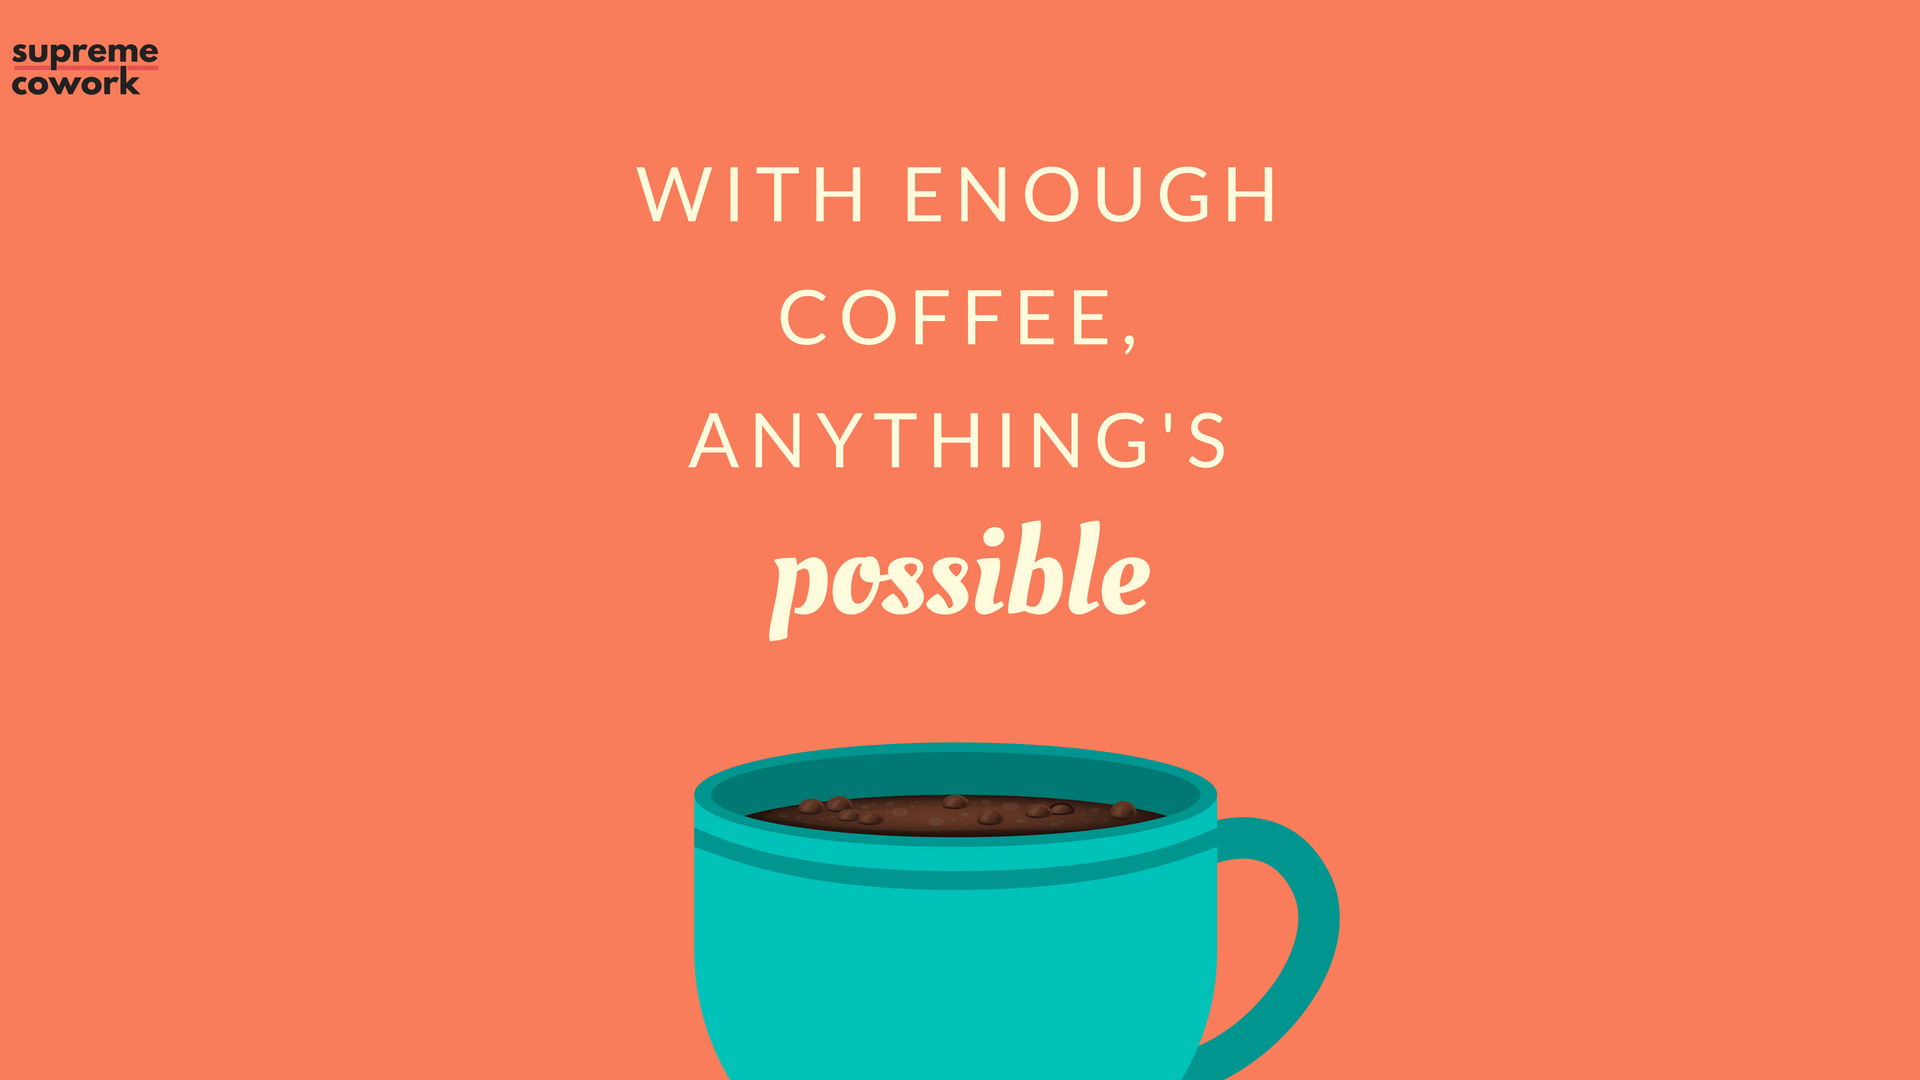 inspirational wallpaper,cup,cup,green,coffee cup,text